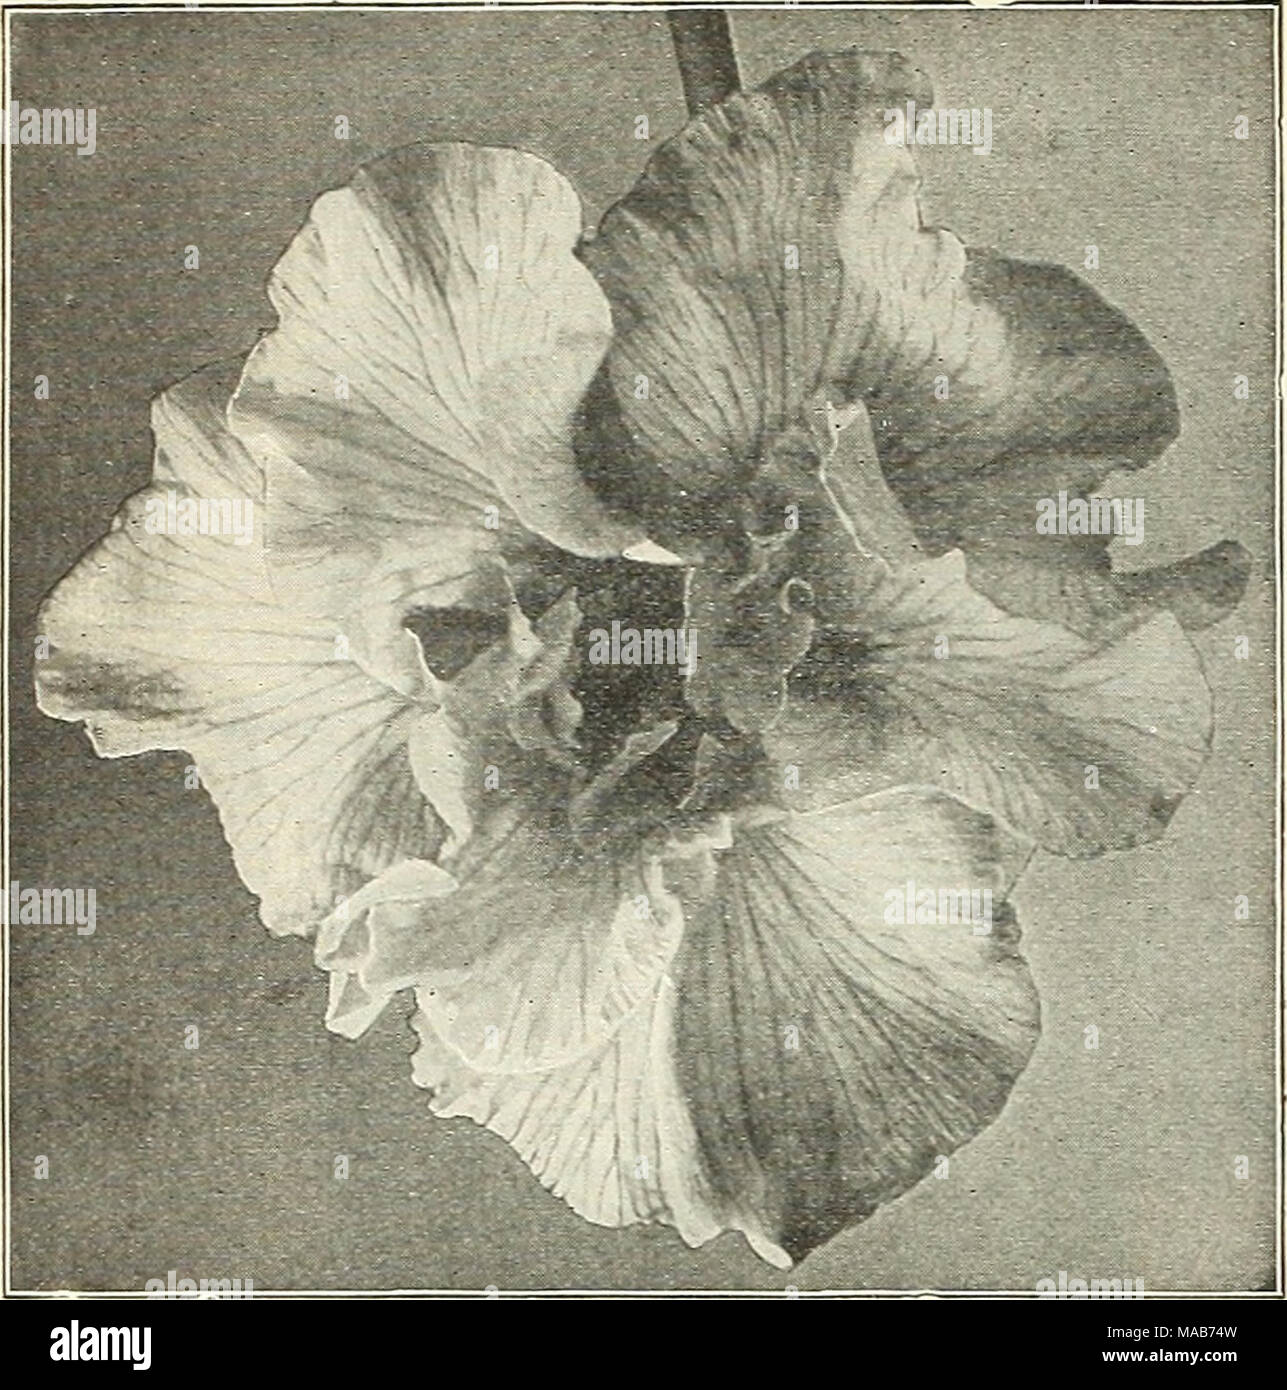 . Dreer's wholesale price list : flower seeds for florists plants for florists bulbs for florists vegetable seeds sundries for florists . Japanese Iris Dreer's Imperial Japanese Iris ]Vo. Order by name or nninber 3. Kosni-no-iro. Violet-blue veined with white; 6 petals. 4. Ifomo-no-niui. A fine free flowering creamy white; 6 petals. 5. Koki-no-iro. Light violet-purple with white : veins; 6 petals., 26. TTcliiu. Rich crimson-purple, veined white; 6 petals. 31. Rinho. Eich lively purple with white veinings; 6 petals. 36. Knino-no obi. Lavender-blue; 6 petals. 43. Shi-nn-ryo. Greyish white, deepl Stock Photo